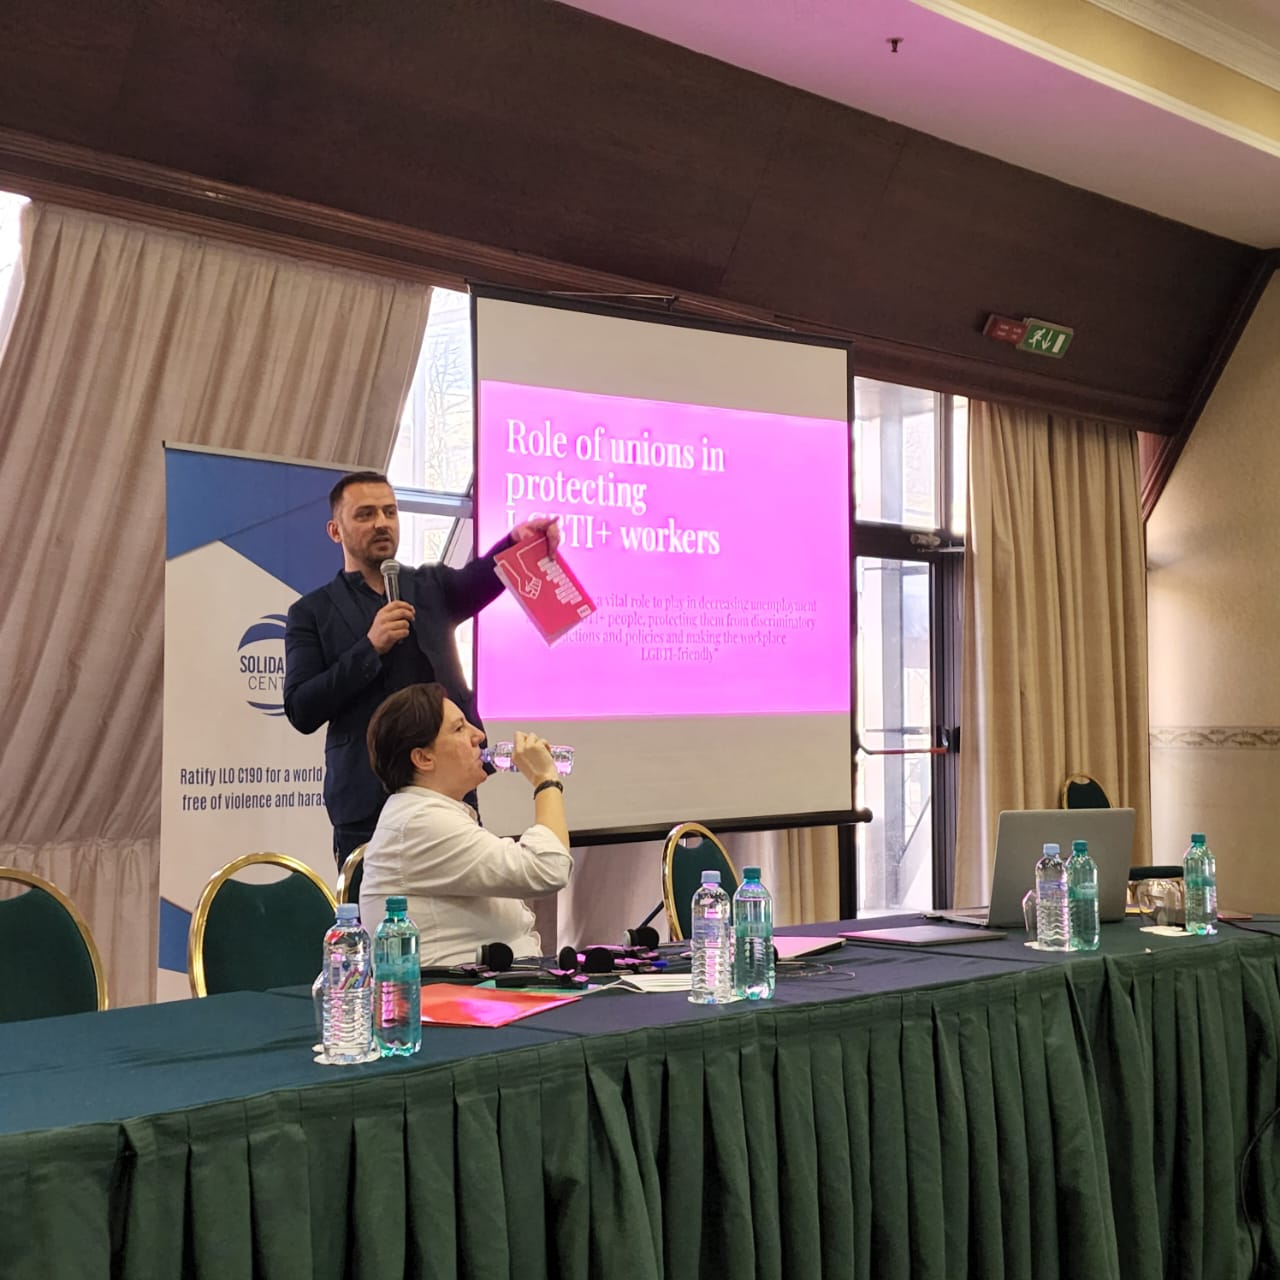 ERA - News - “Discrimination at Work” Conference addresses LGBTI+ workers rights in the Western Balkans